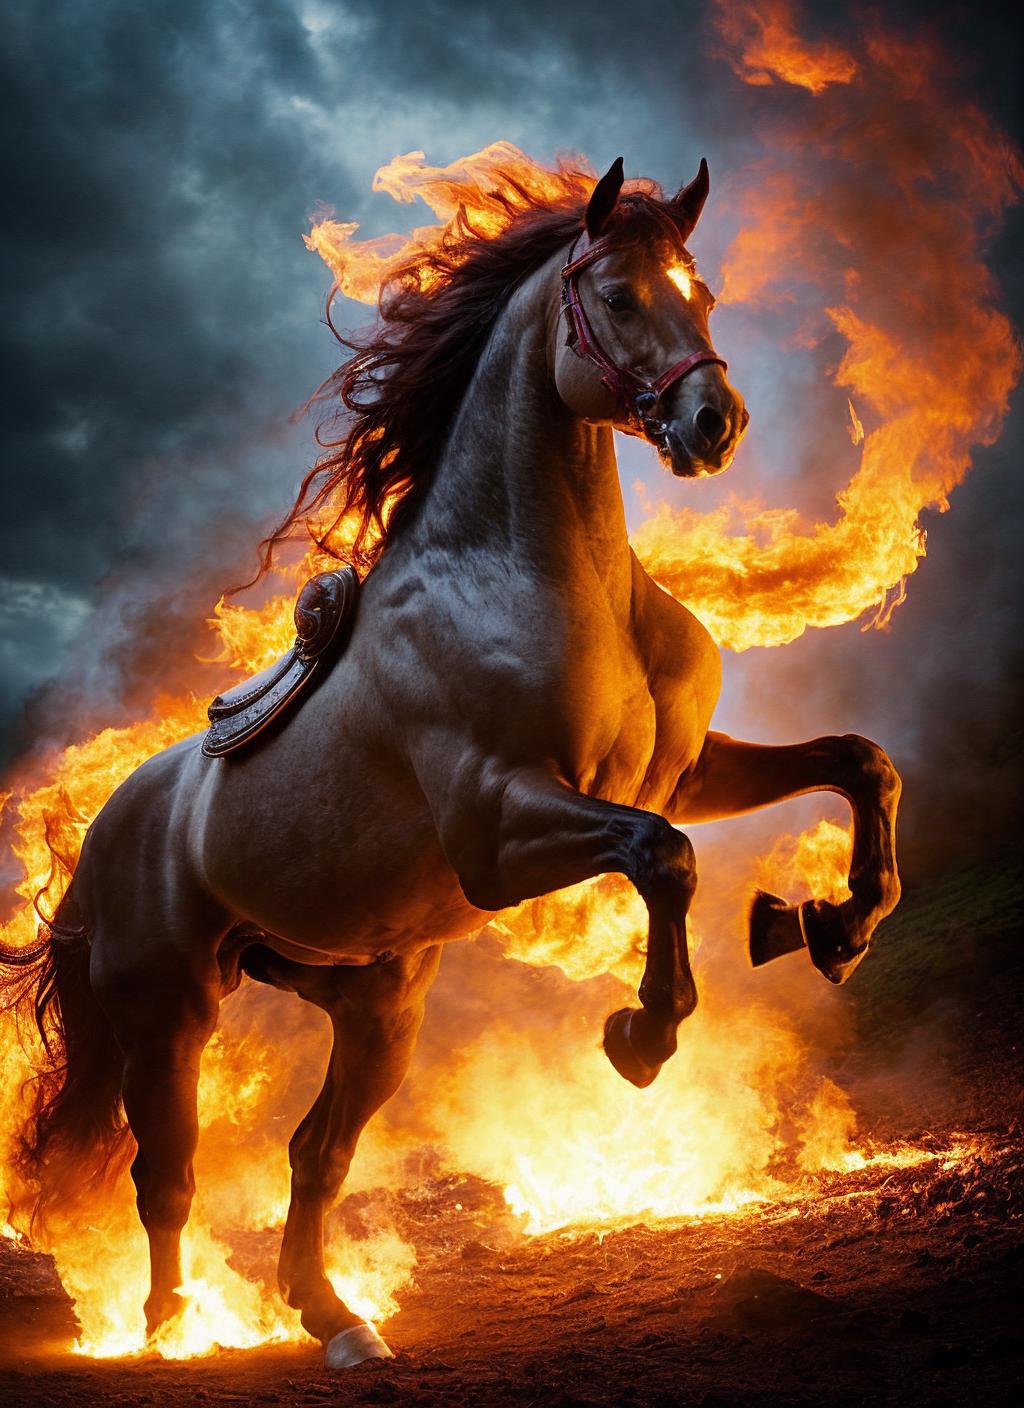 Wild Horse Running Through Fire, with Smoke and Flames Surrounding It